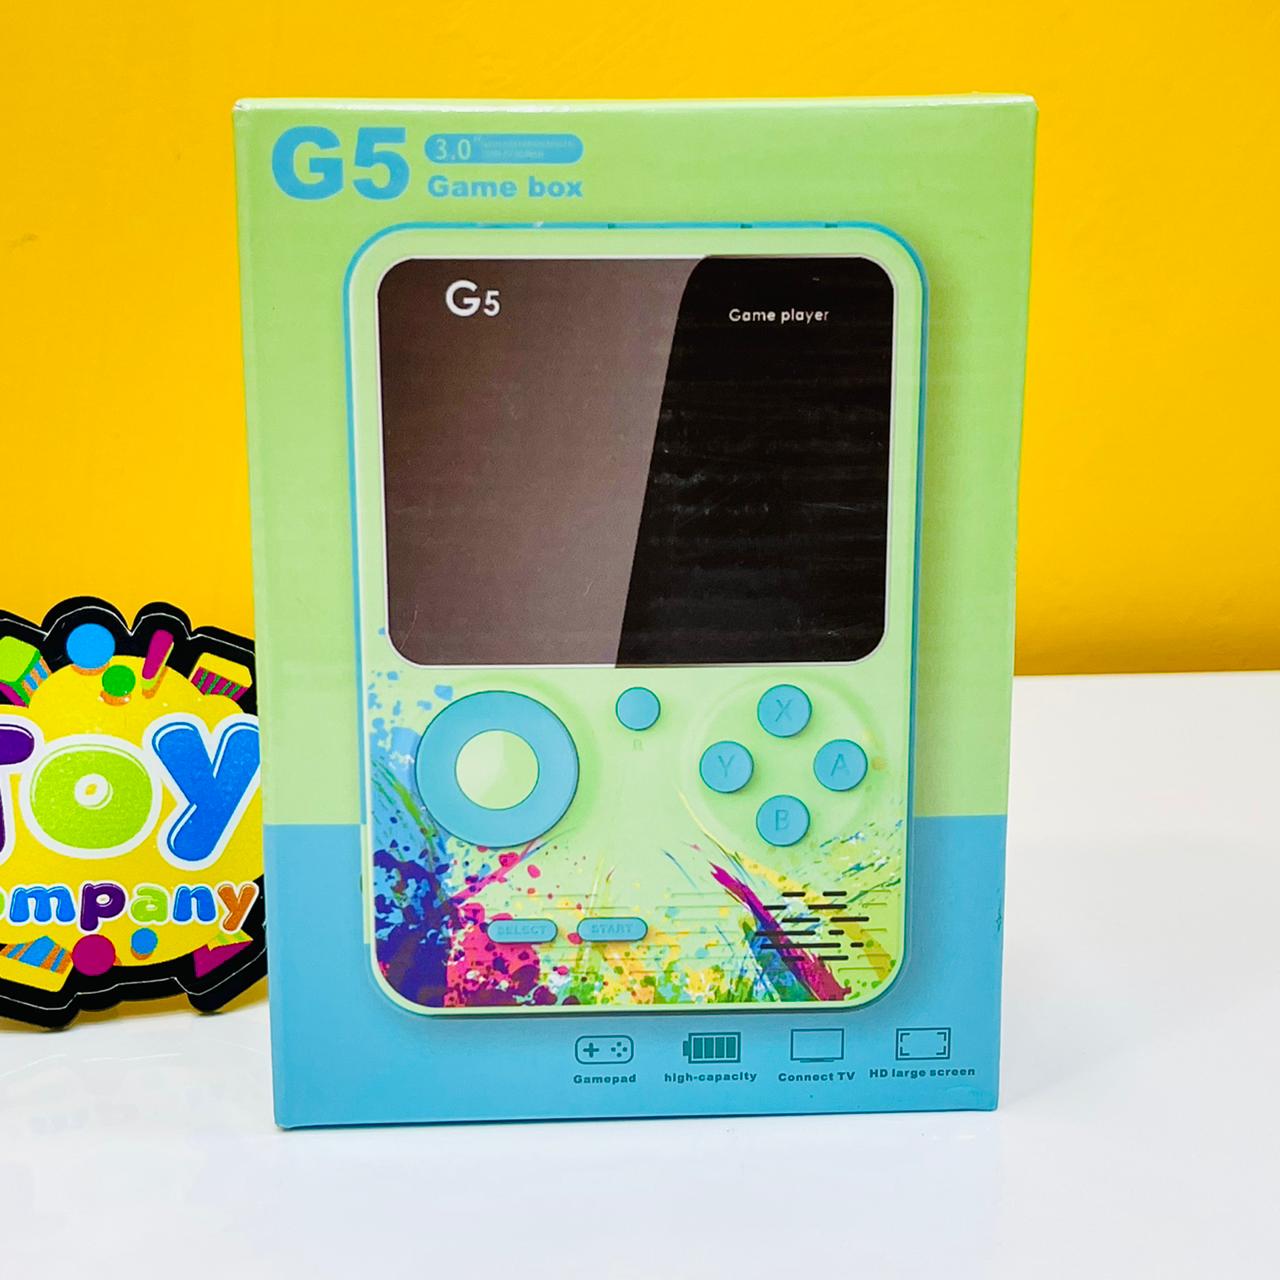 G5 Video Game Console - 500 Games